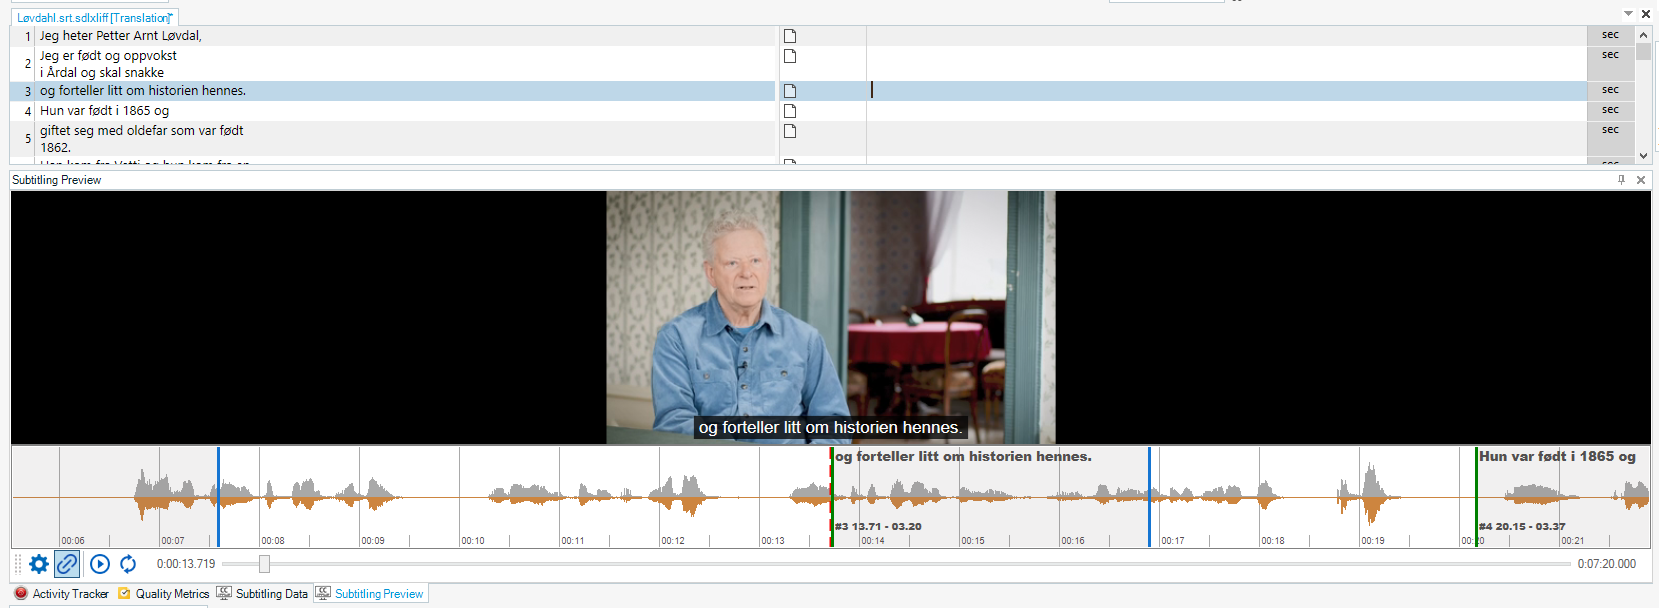 Screenshot of Trados Studio subtitling interface with Norwegian text, waveform display, and a video preview with a person's face blurred. Subtitles are synchronized with the audio.